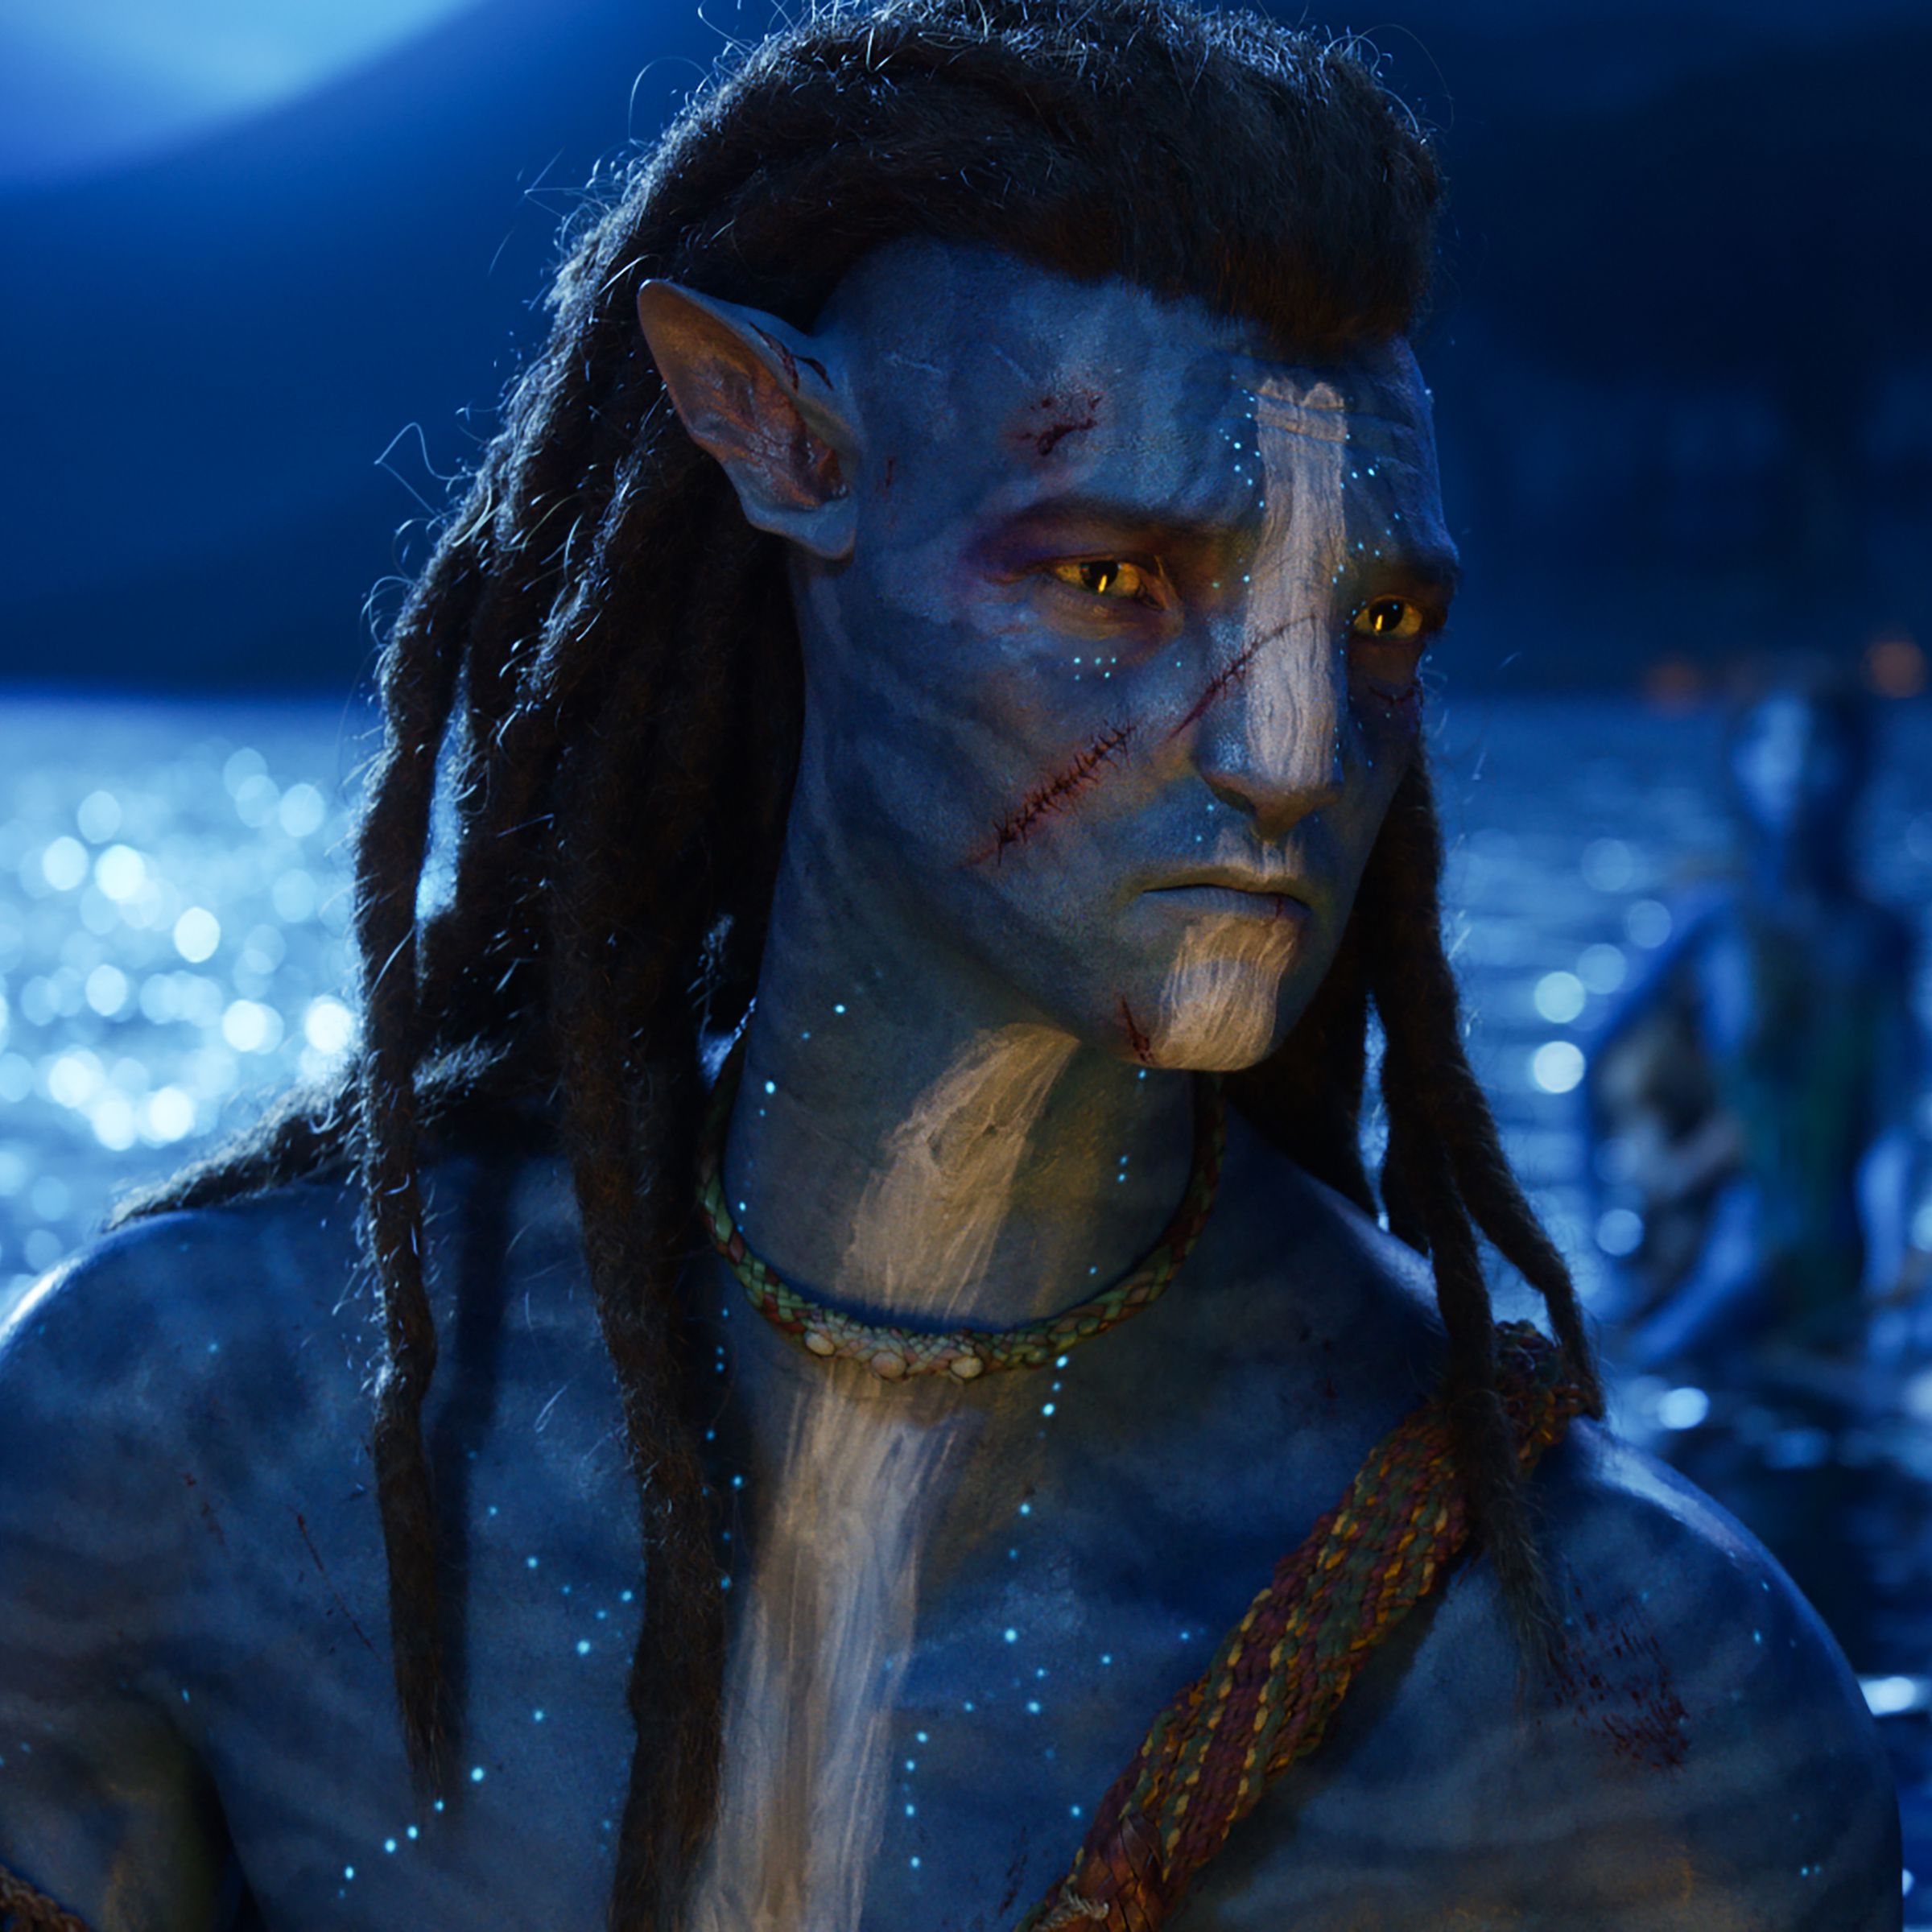 A blue humanoid being with feline features and a thick head of dreadlocks riding on the back of an animal in the middle of the ocean at night. In the background, you can see the moonlit sky and the moon’s reflected light bouncing off the surface of the water.